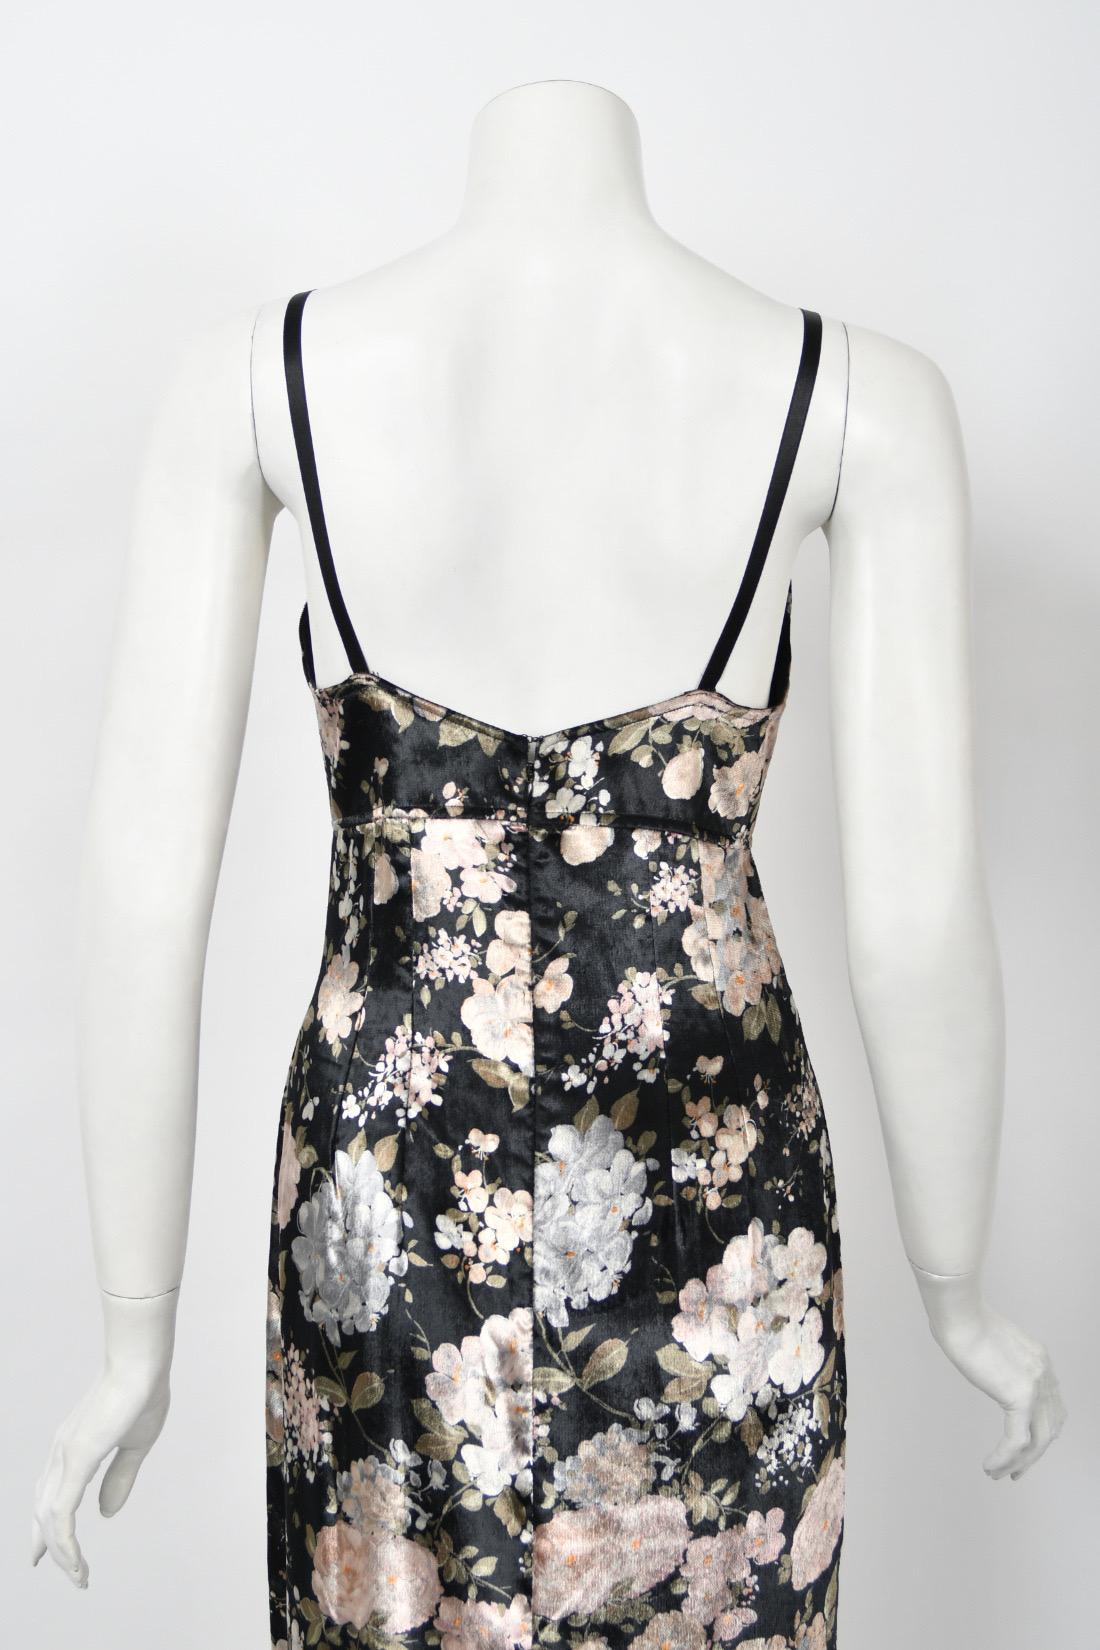 1997 Dolce & Gabbana Floral Stretch Velvet Cut-Out Bustier Slip Dress with Tags  For Sale 11